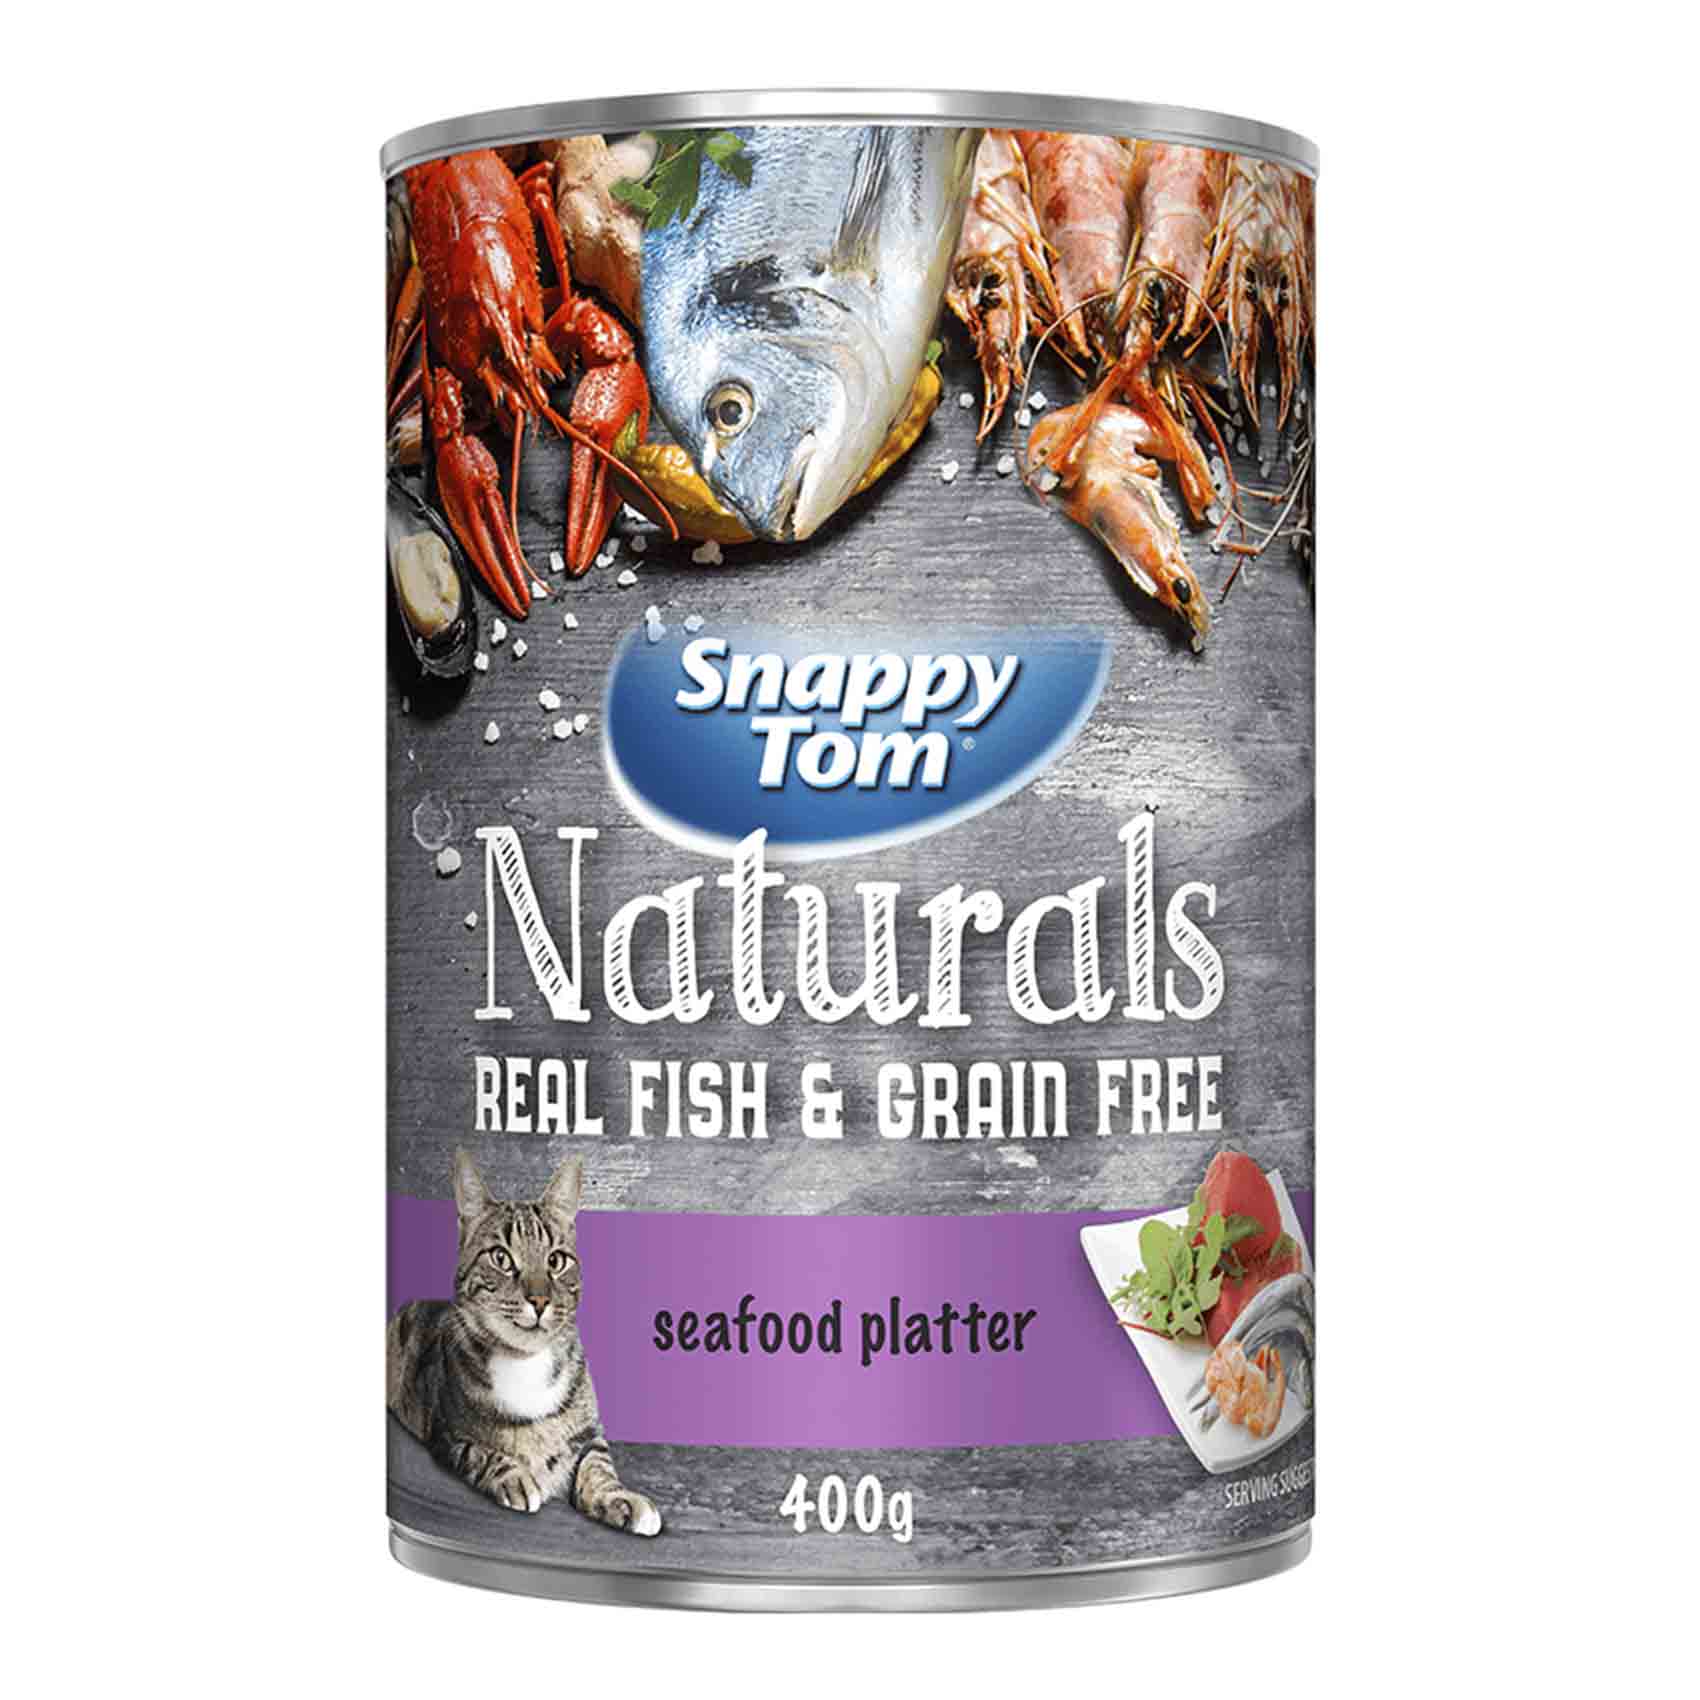 Snappy Tom Naturals Real Fish And Grain Free Seafood Platter Cat Food 400g